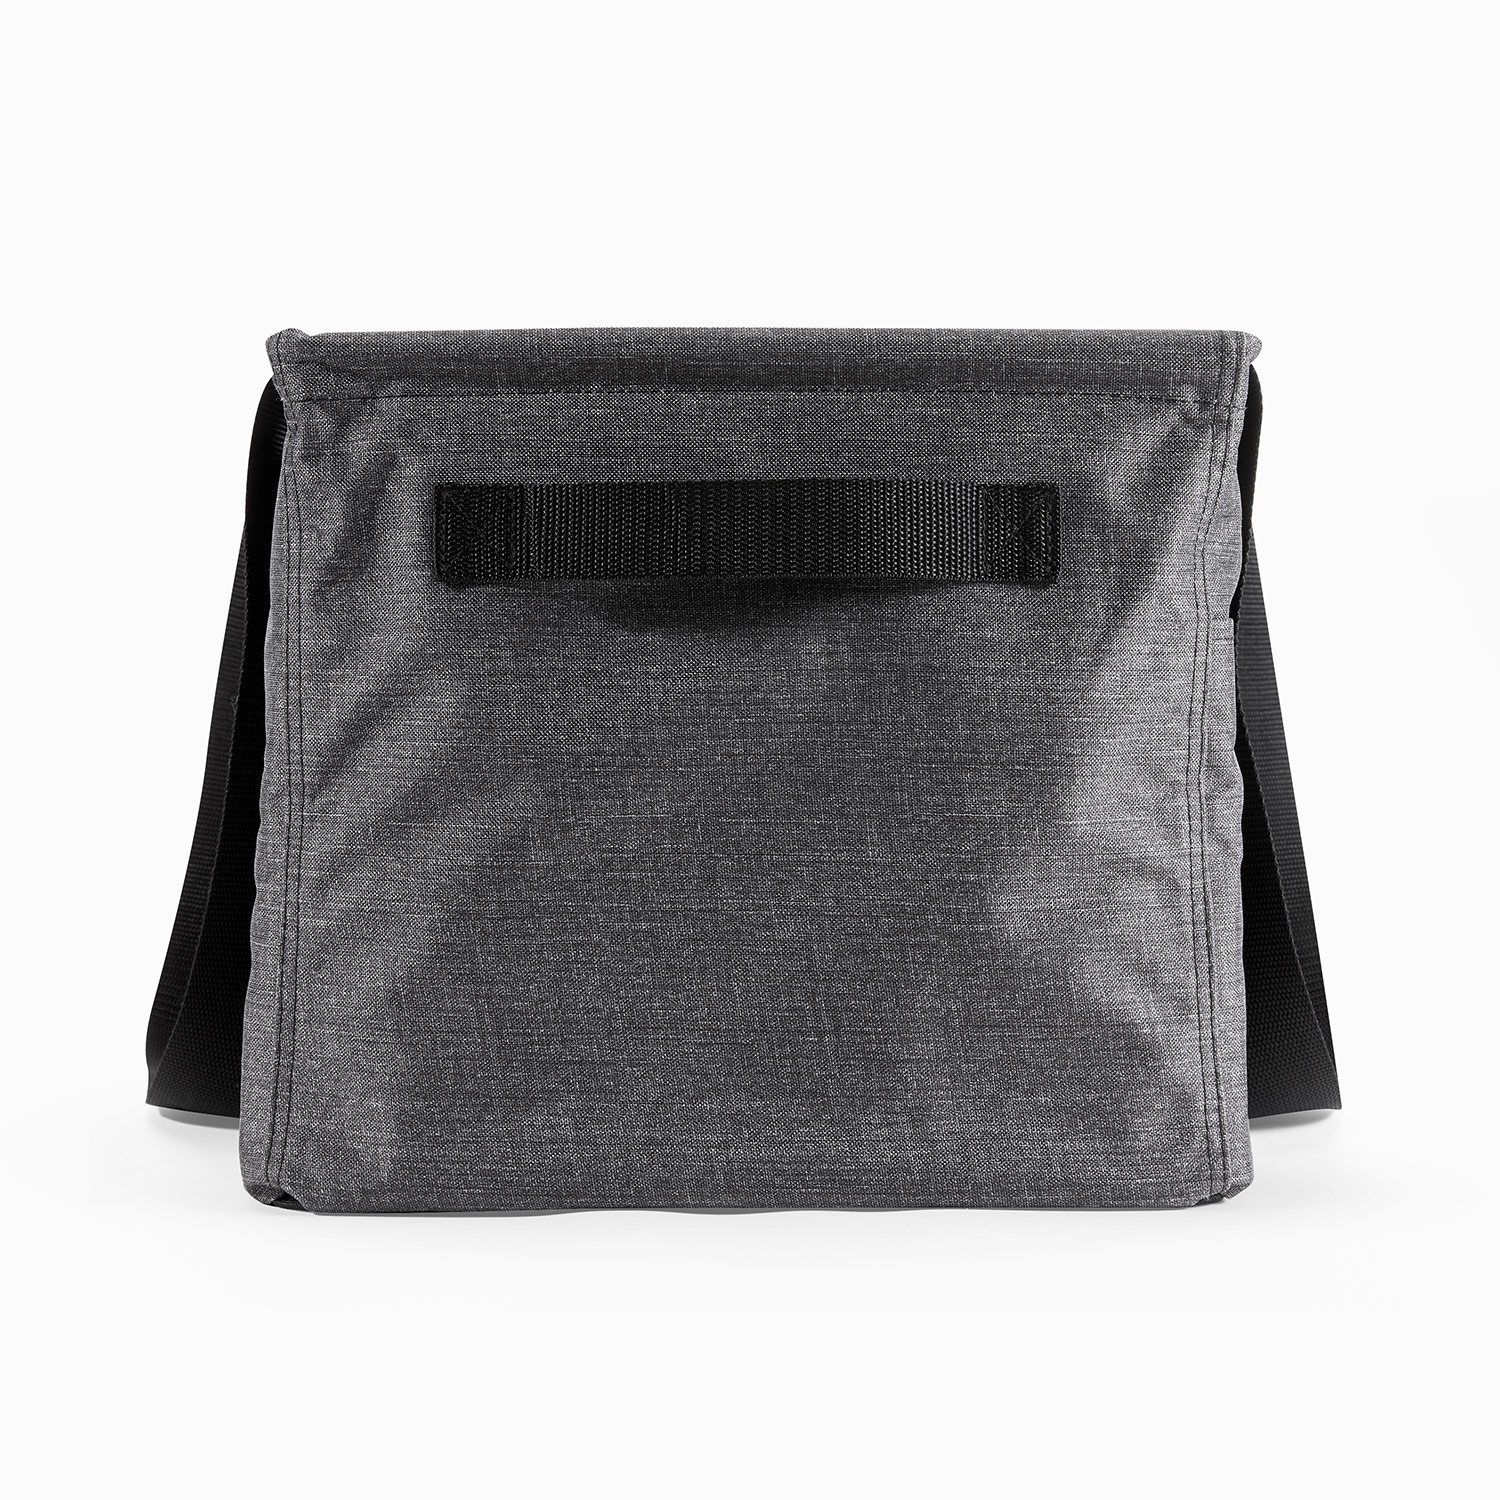  Thirty-One Deluxe Utility Tote in Charcoal Crosshatch - No  Monogram - 4441